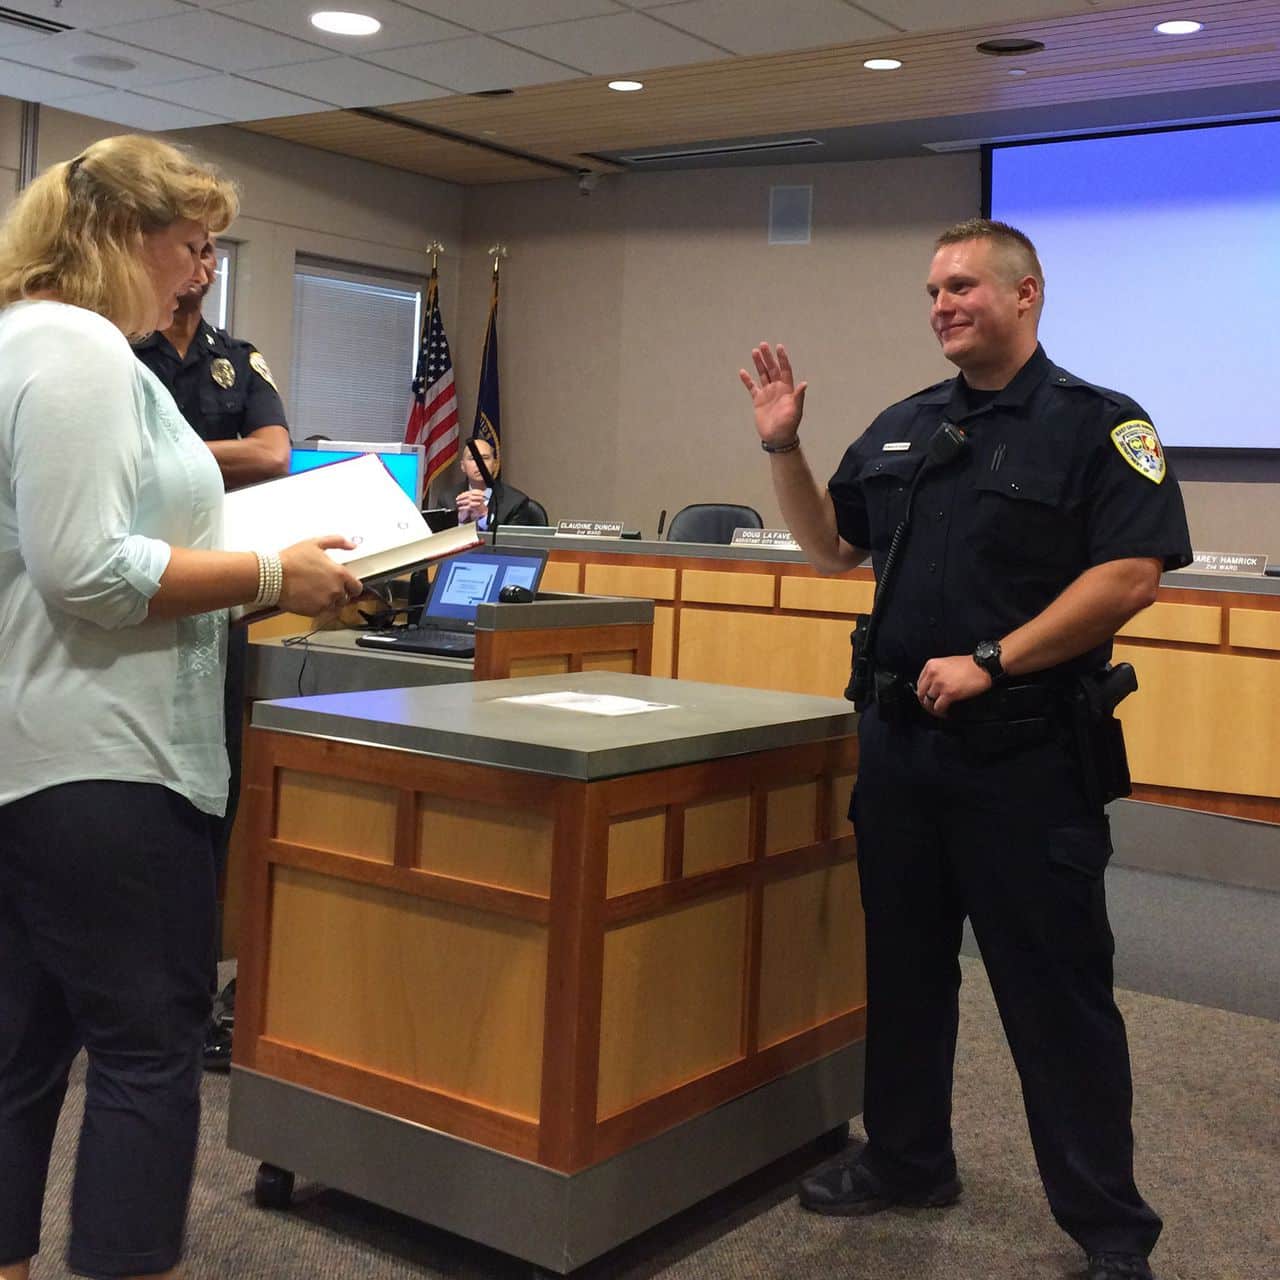 East Grand Rapids gains new public safety officer